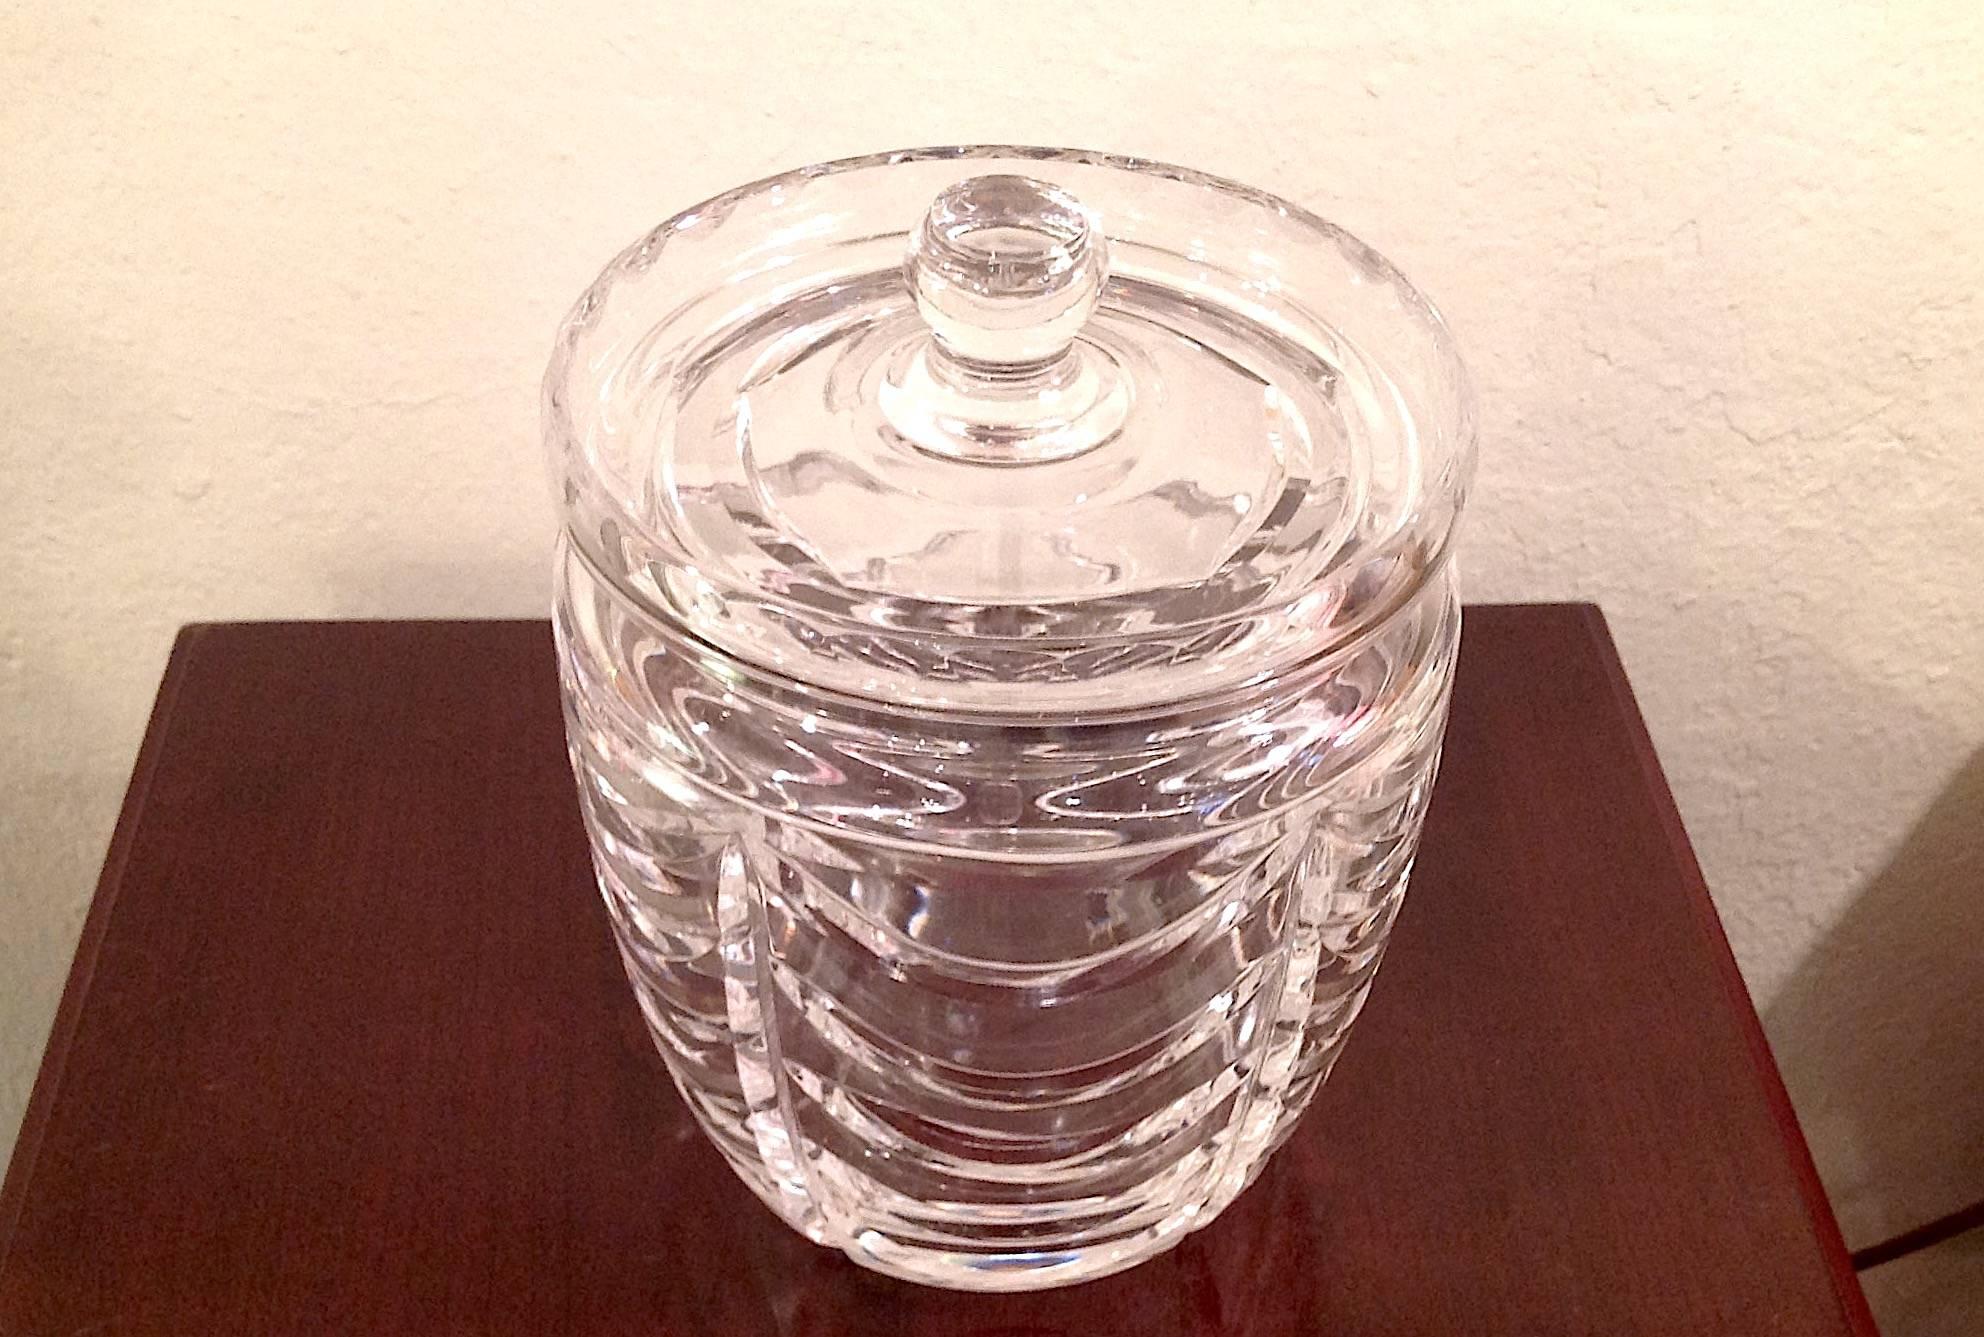 Tiffany crystal biscuit jar with lid by Royal Brierly, Swag Pattern, measures 7 inches high by 5 inches wide.